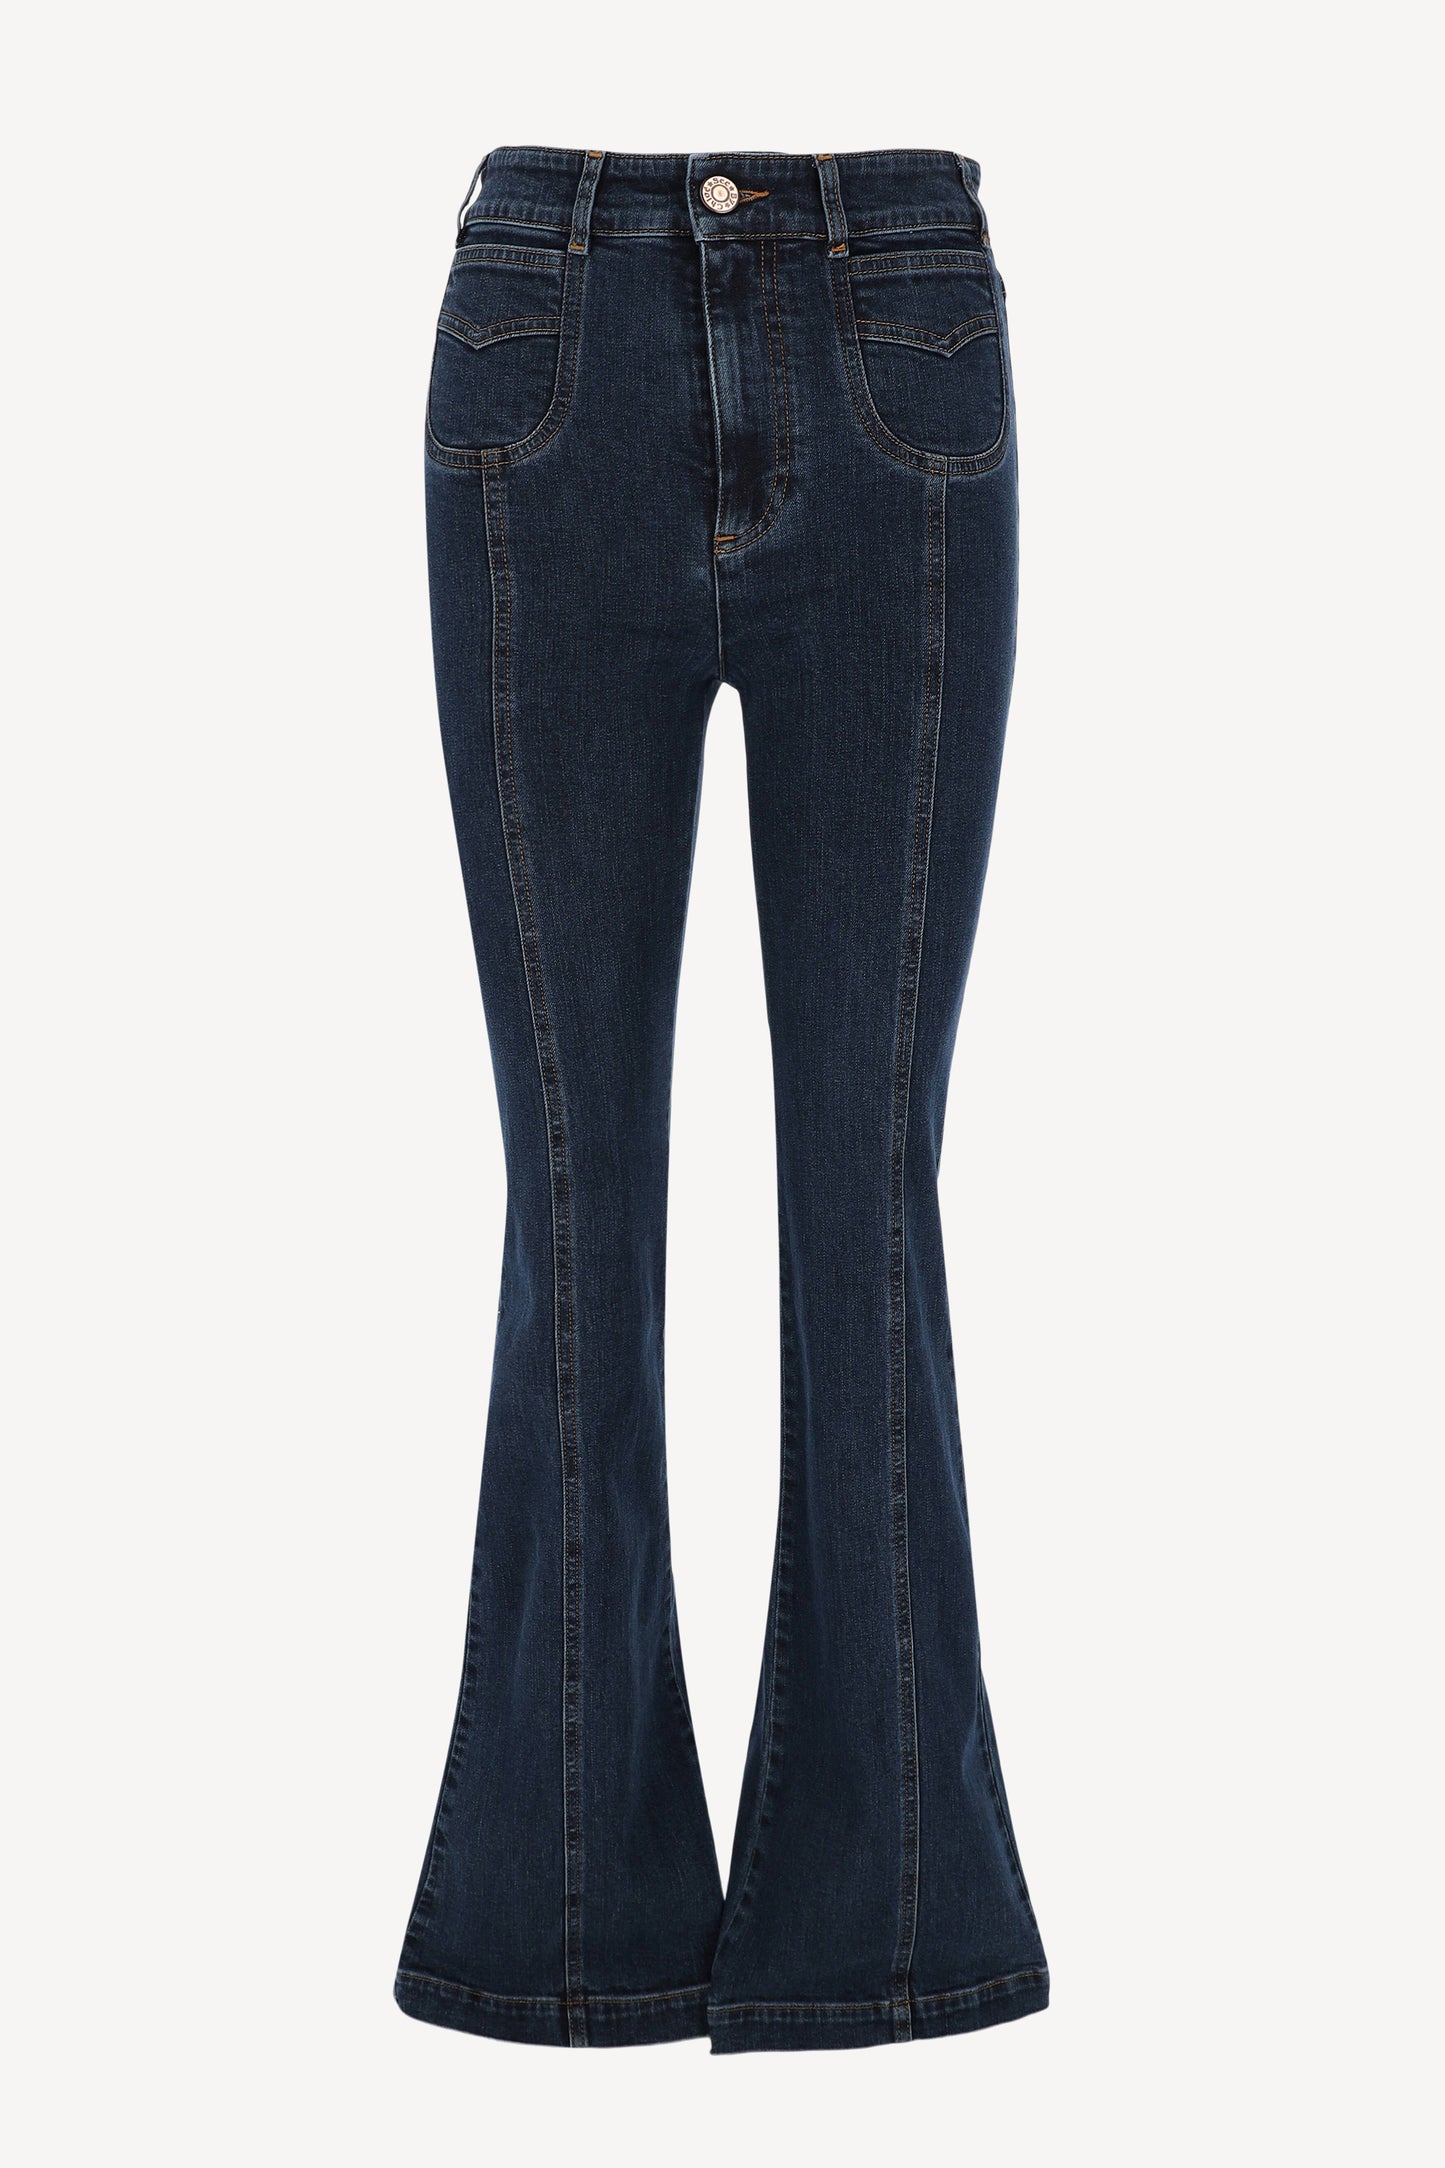 Jeans mit Bootcut in Shady CobaltSee by Chloé - Anita Hass